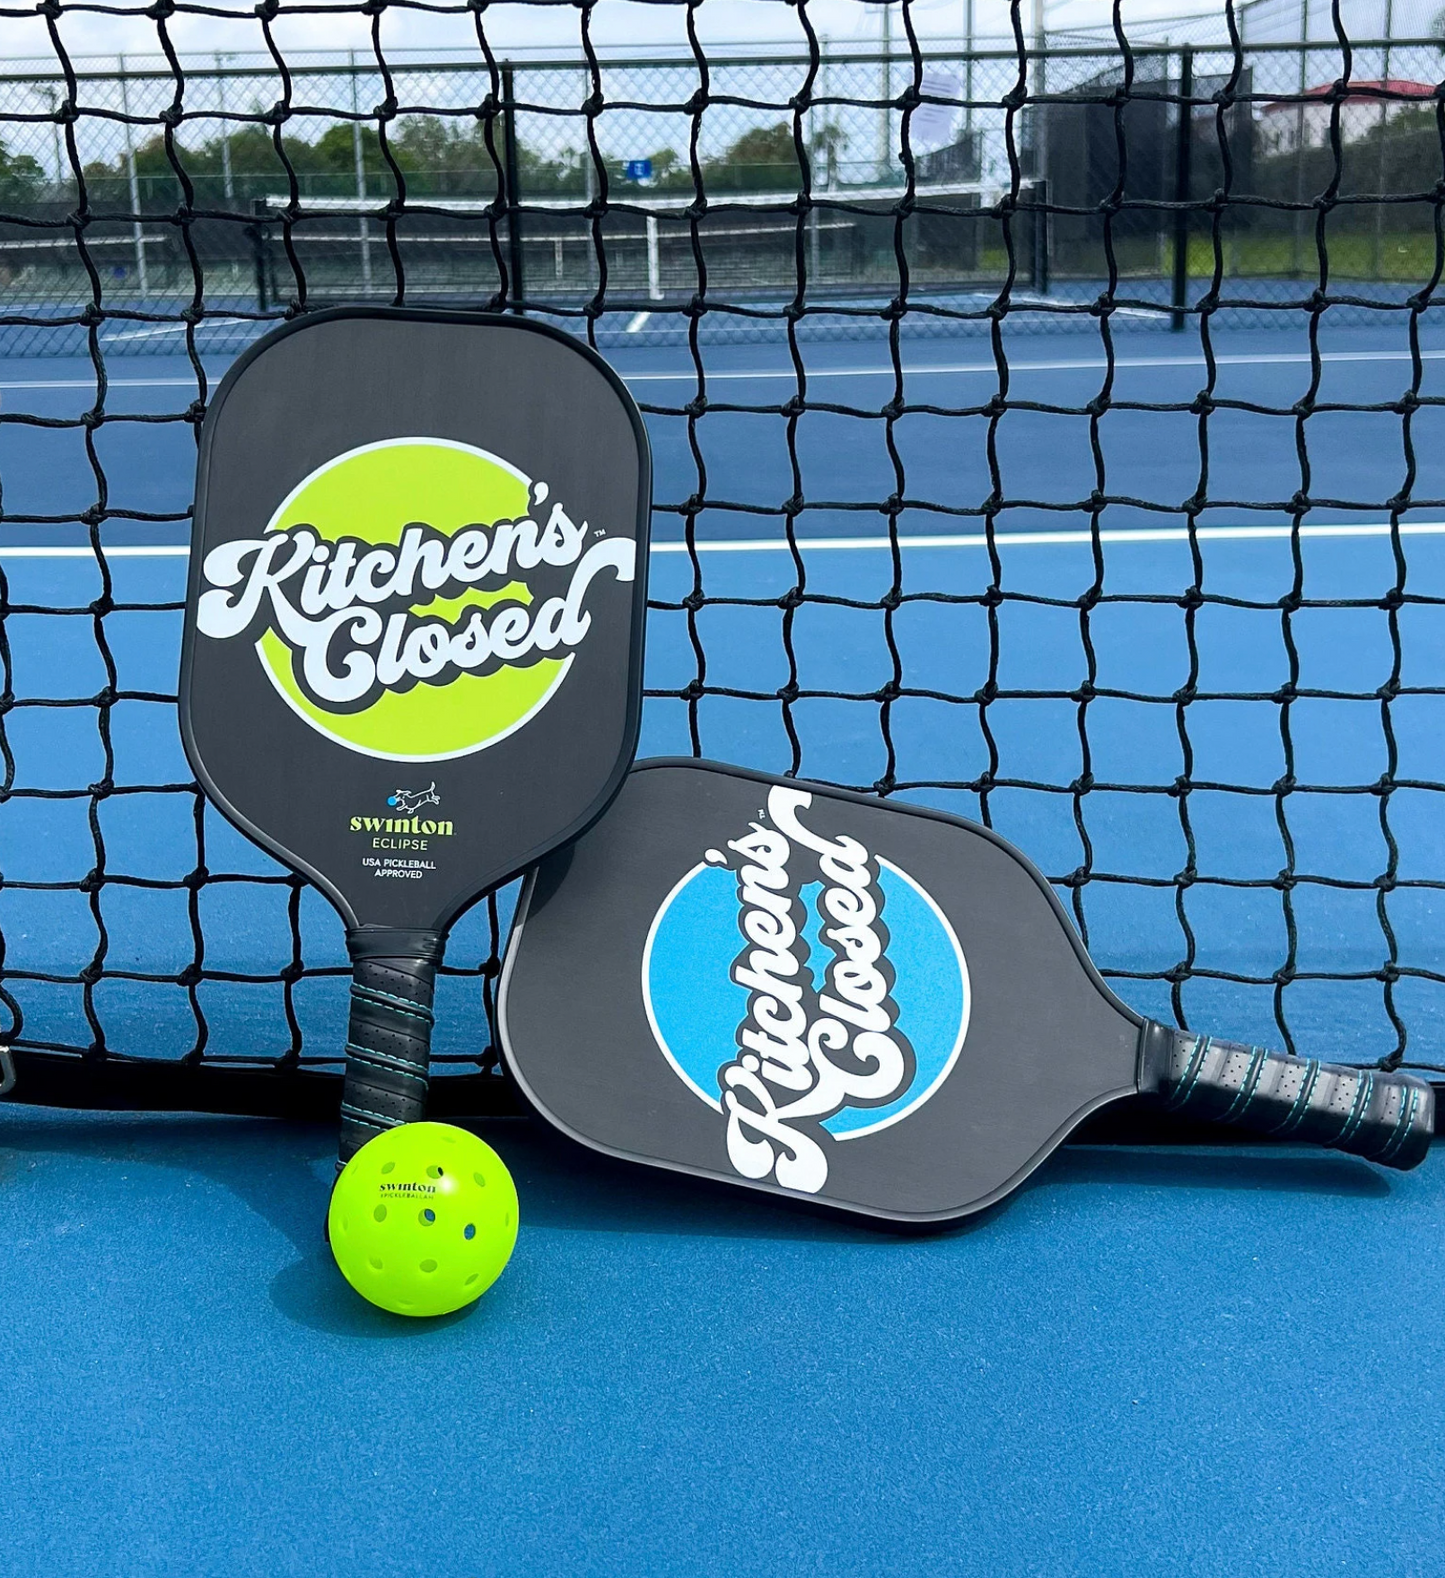 Eclipse Kitchen's Closed Pickleball Paddle